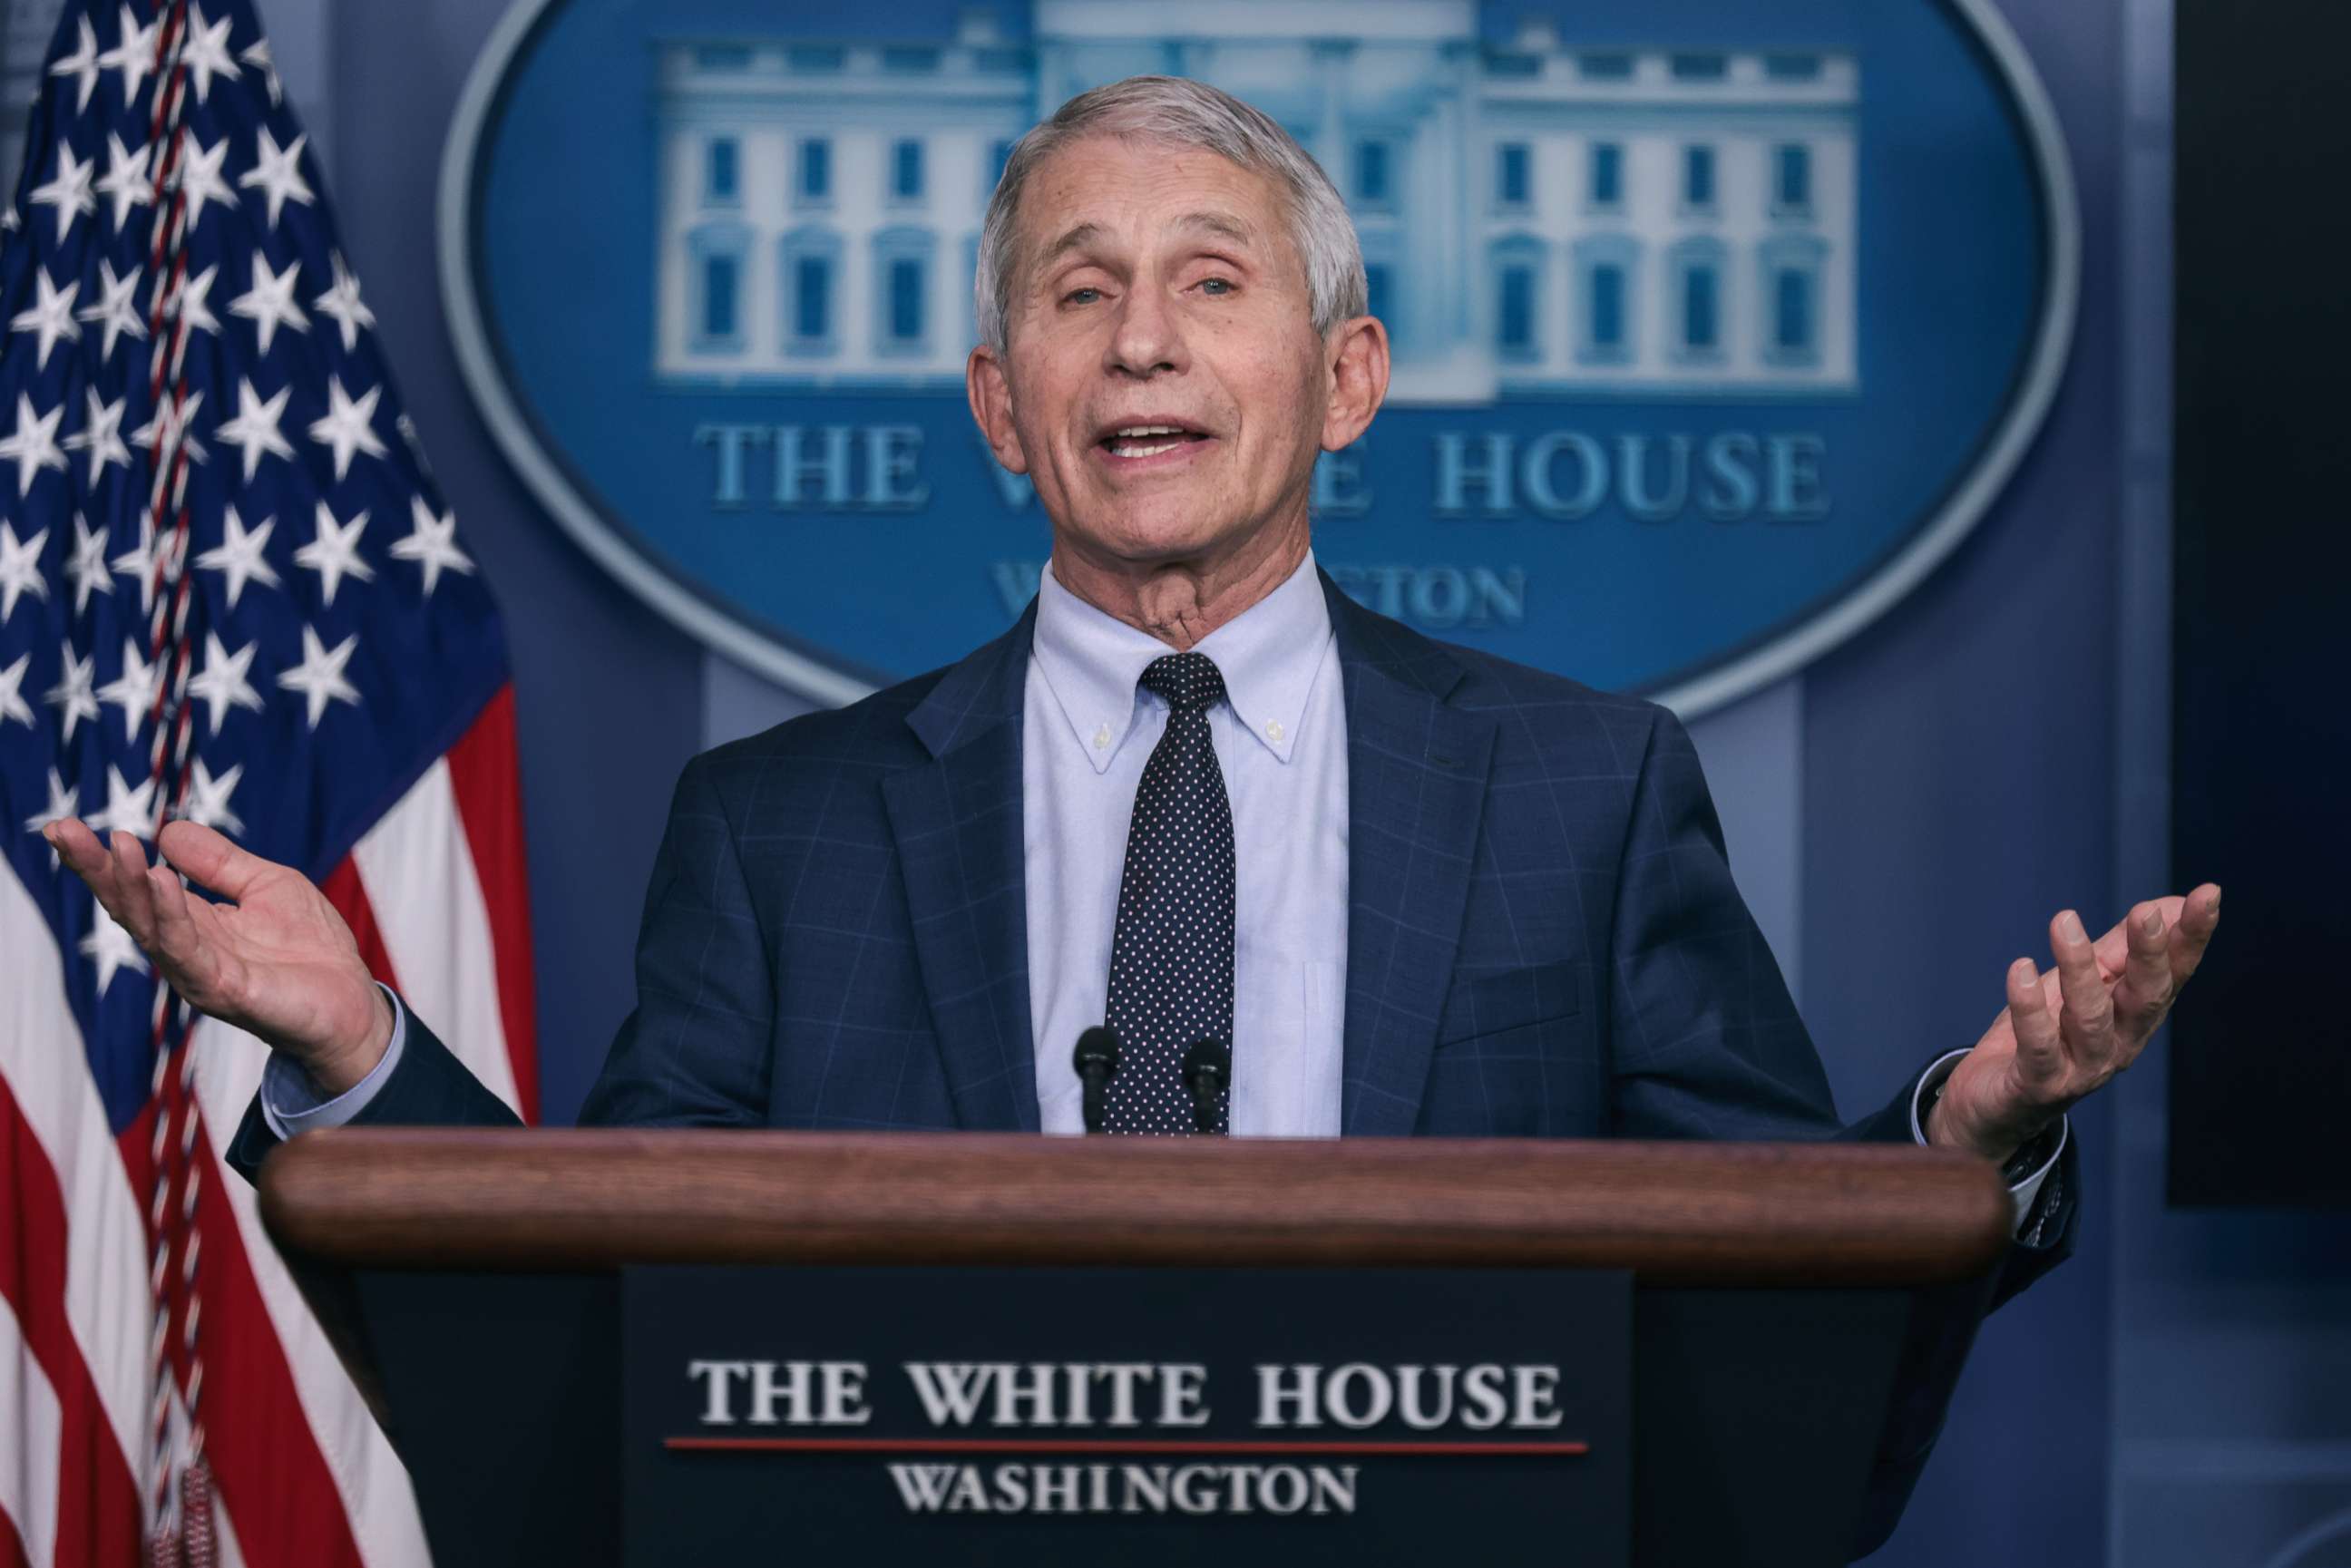 PHOTO: Dr. Anthony Fauci, Chief Medical Advisor to the President, speaks during a news conference in the James S. Brady Press Briefing Room at the White House in Washington, DC on Dec. 01, 2021.